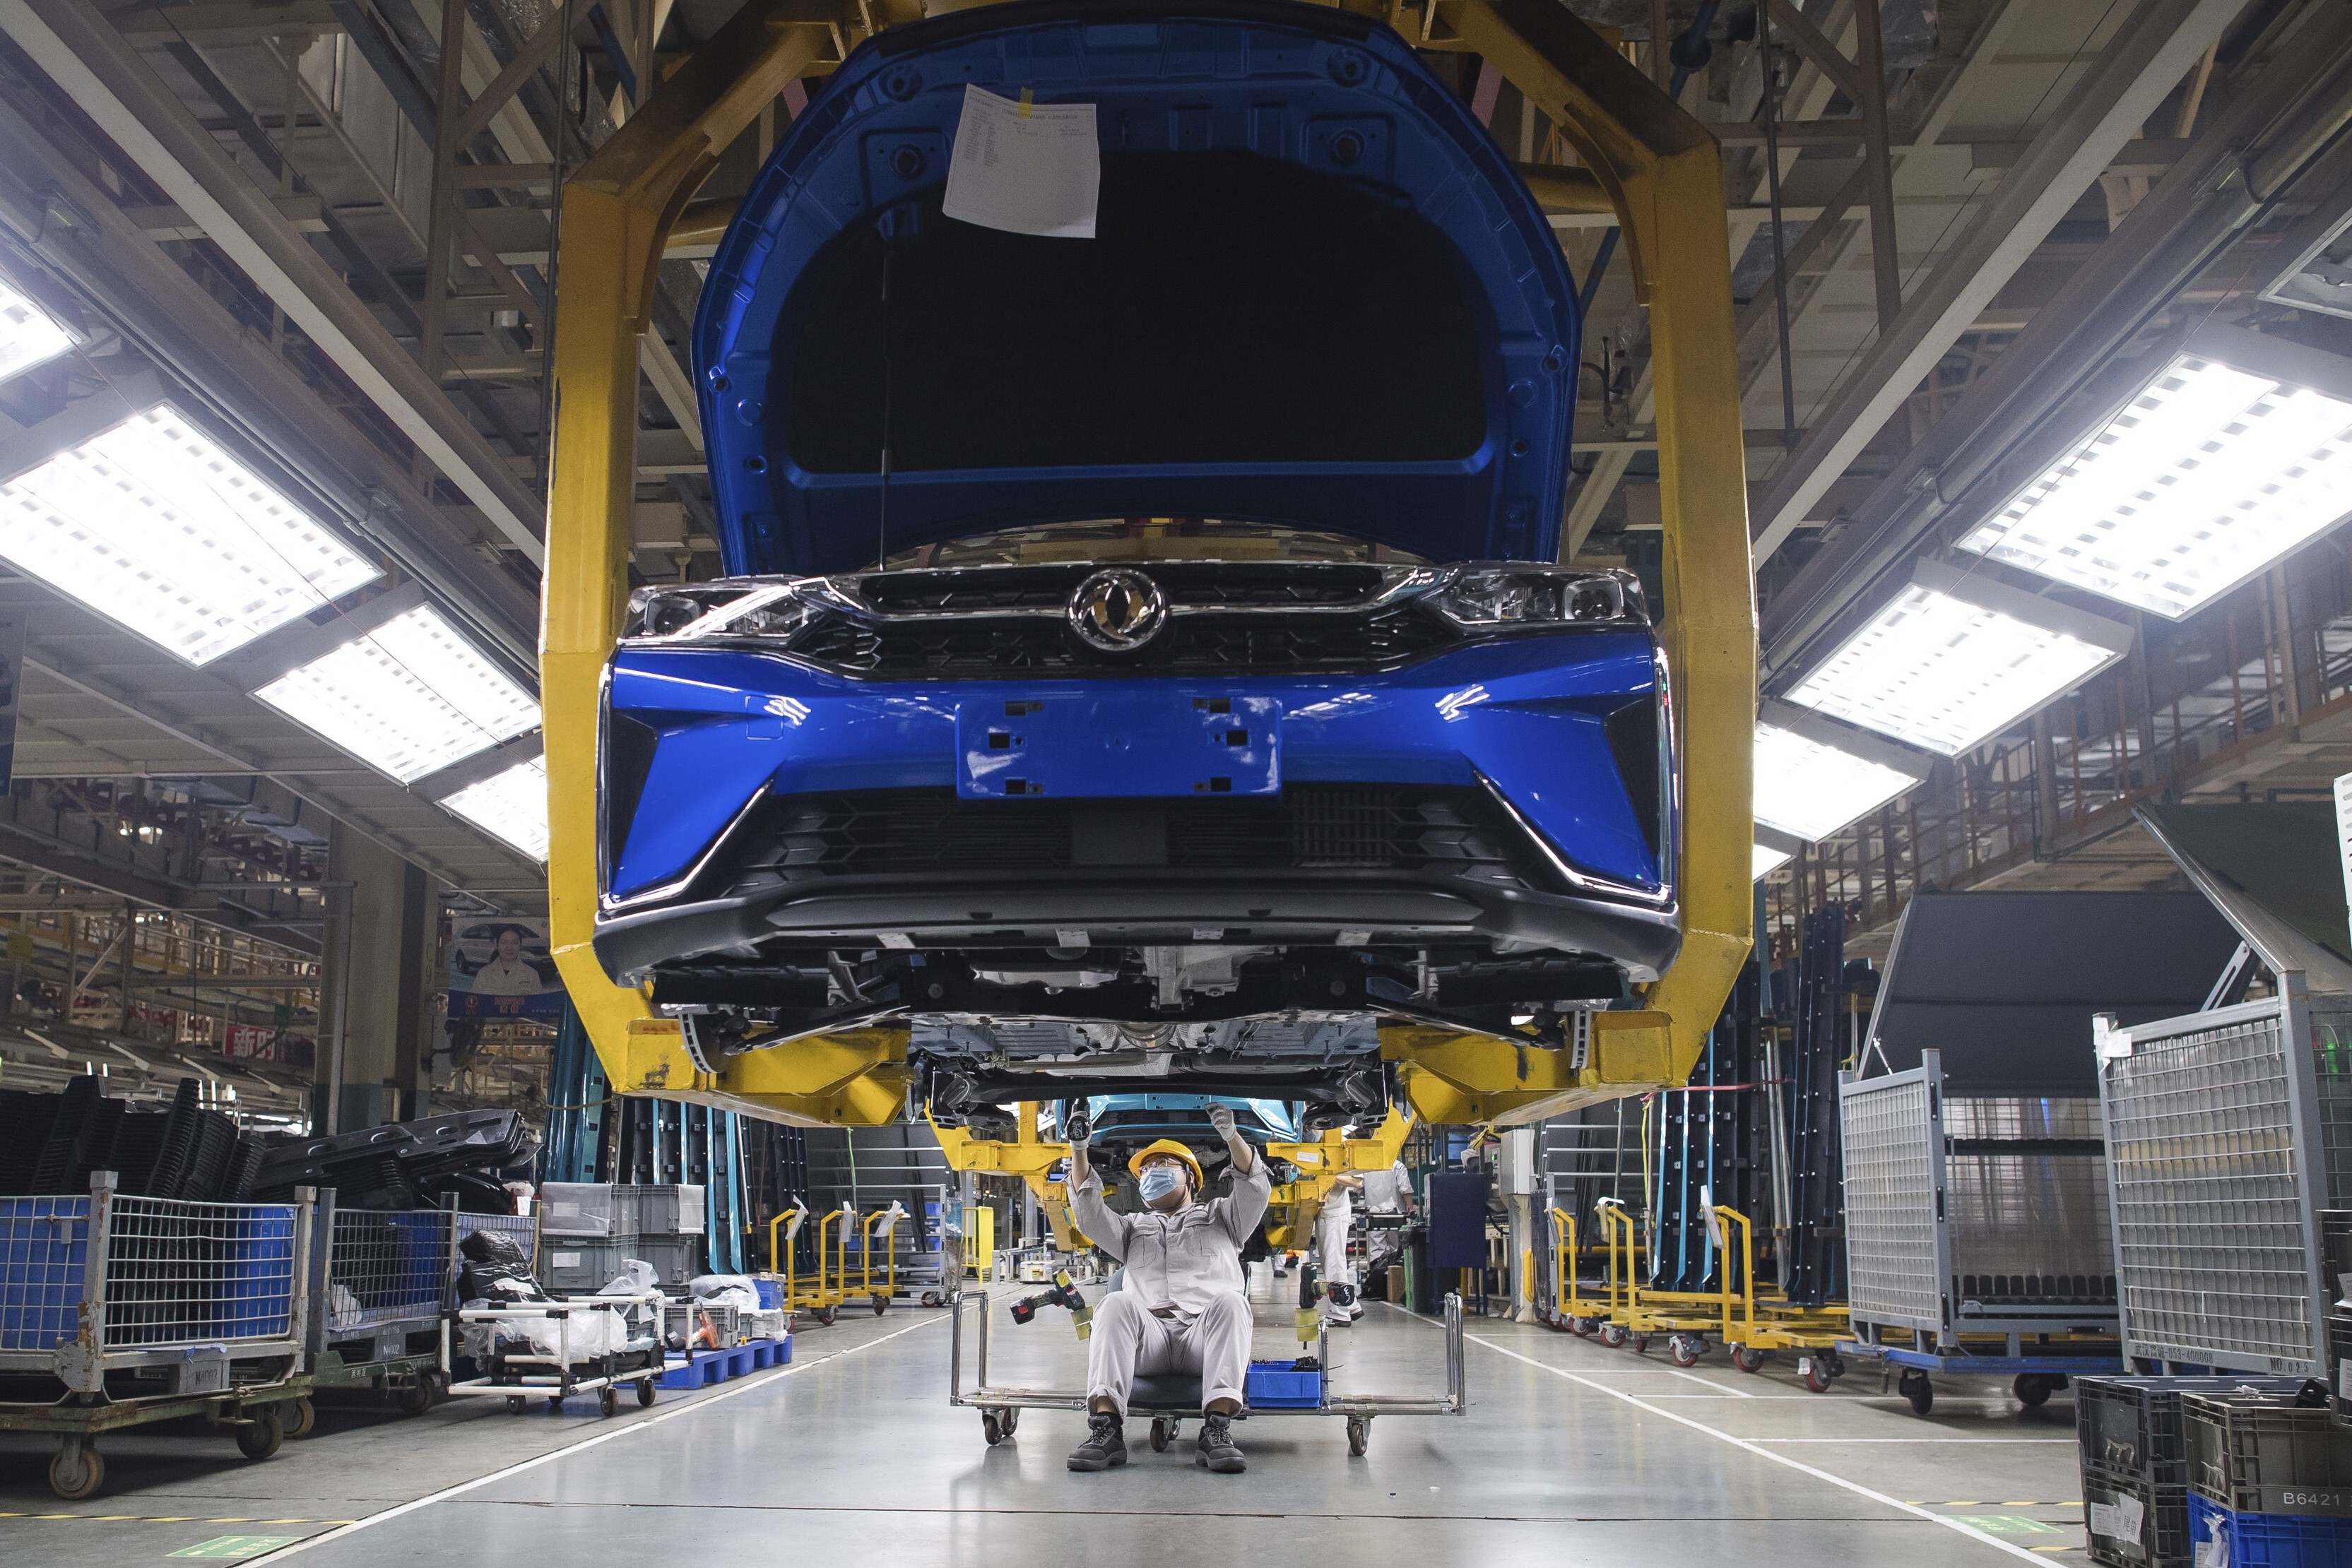 A Dongfeng Motor Group assembly line in Wuhan on March 24, 2020. As industrial activity picks up in China, the coronavirus pandemic is shutting down other economies across the world. Photo: Xinhua